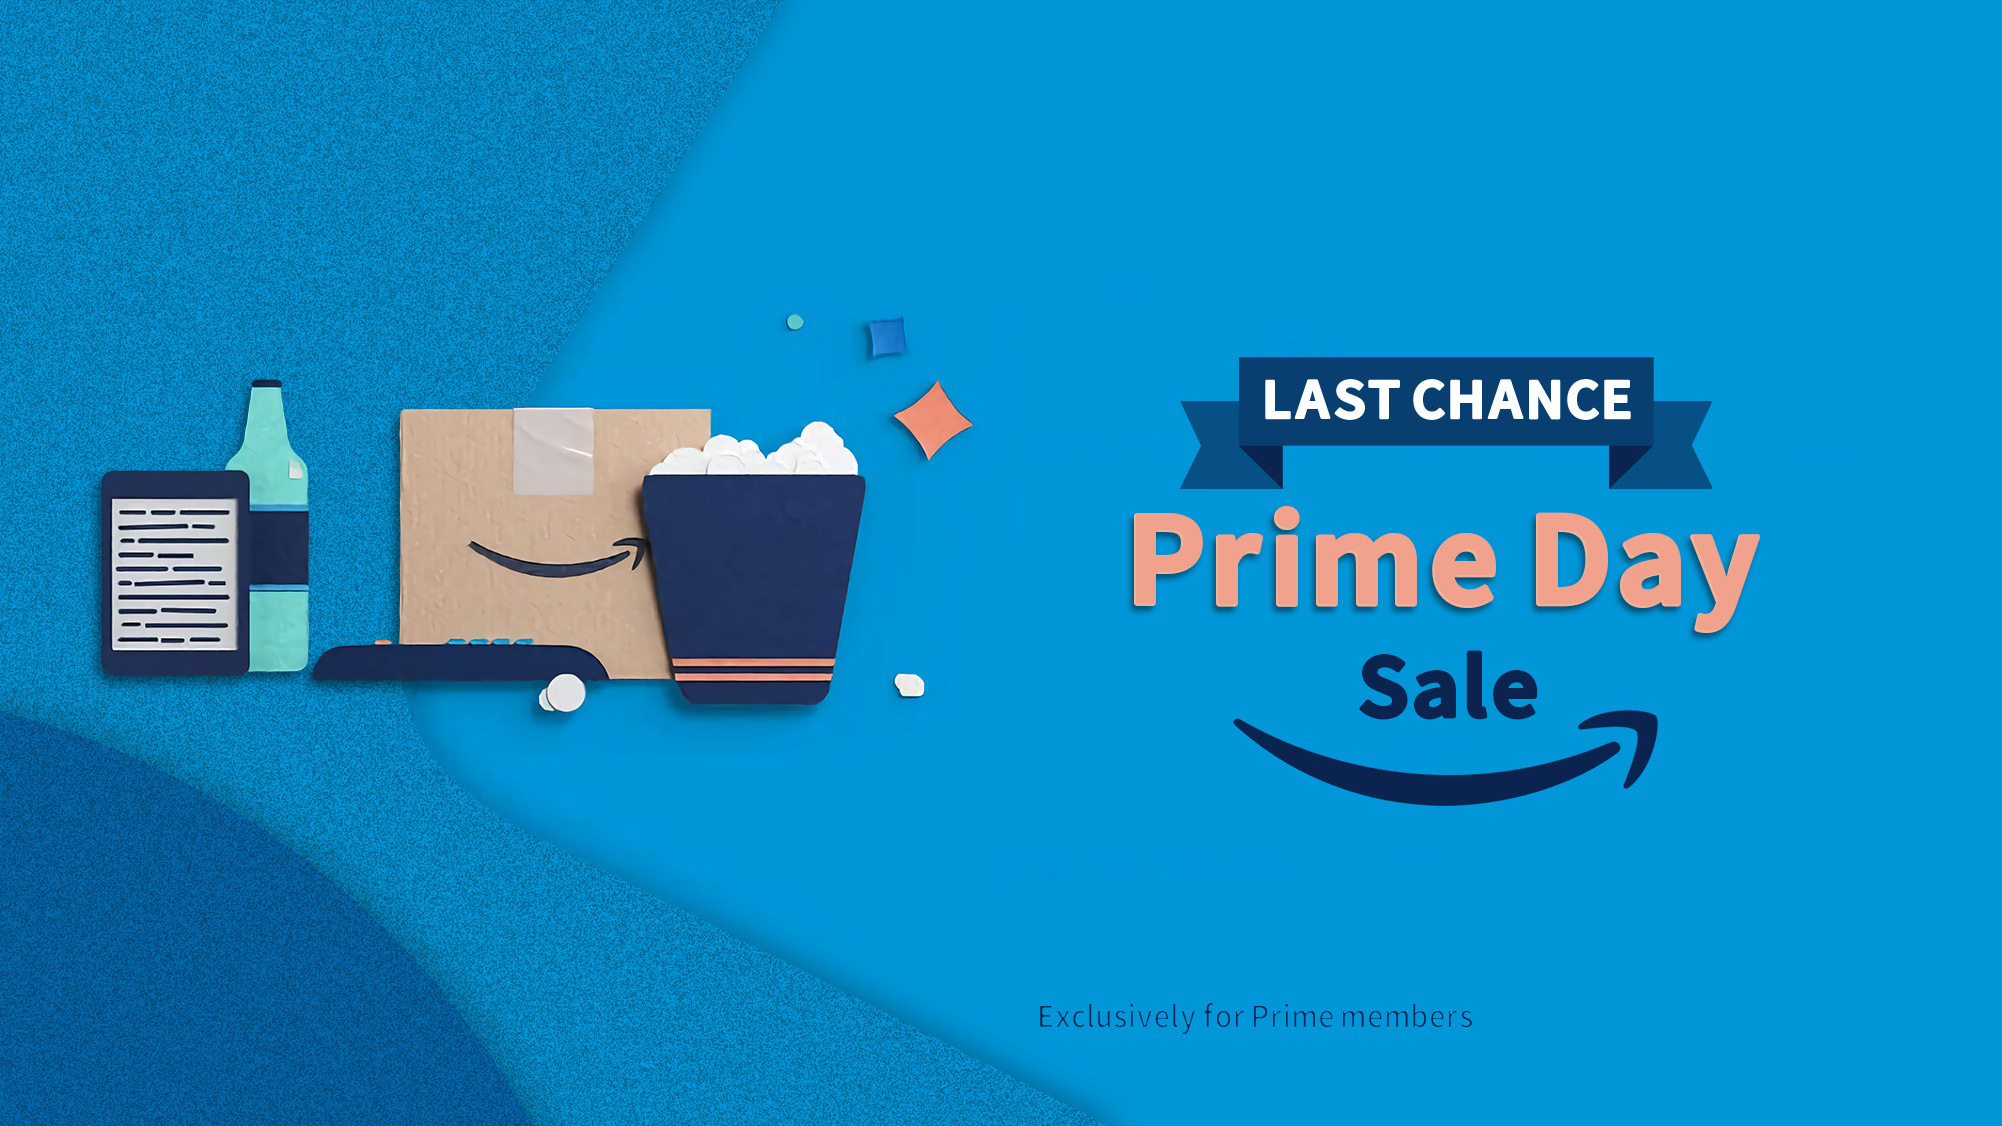 Here Are the Best Apple Deals You Can Still Get Before Amazon Prime Day Ends